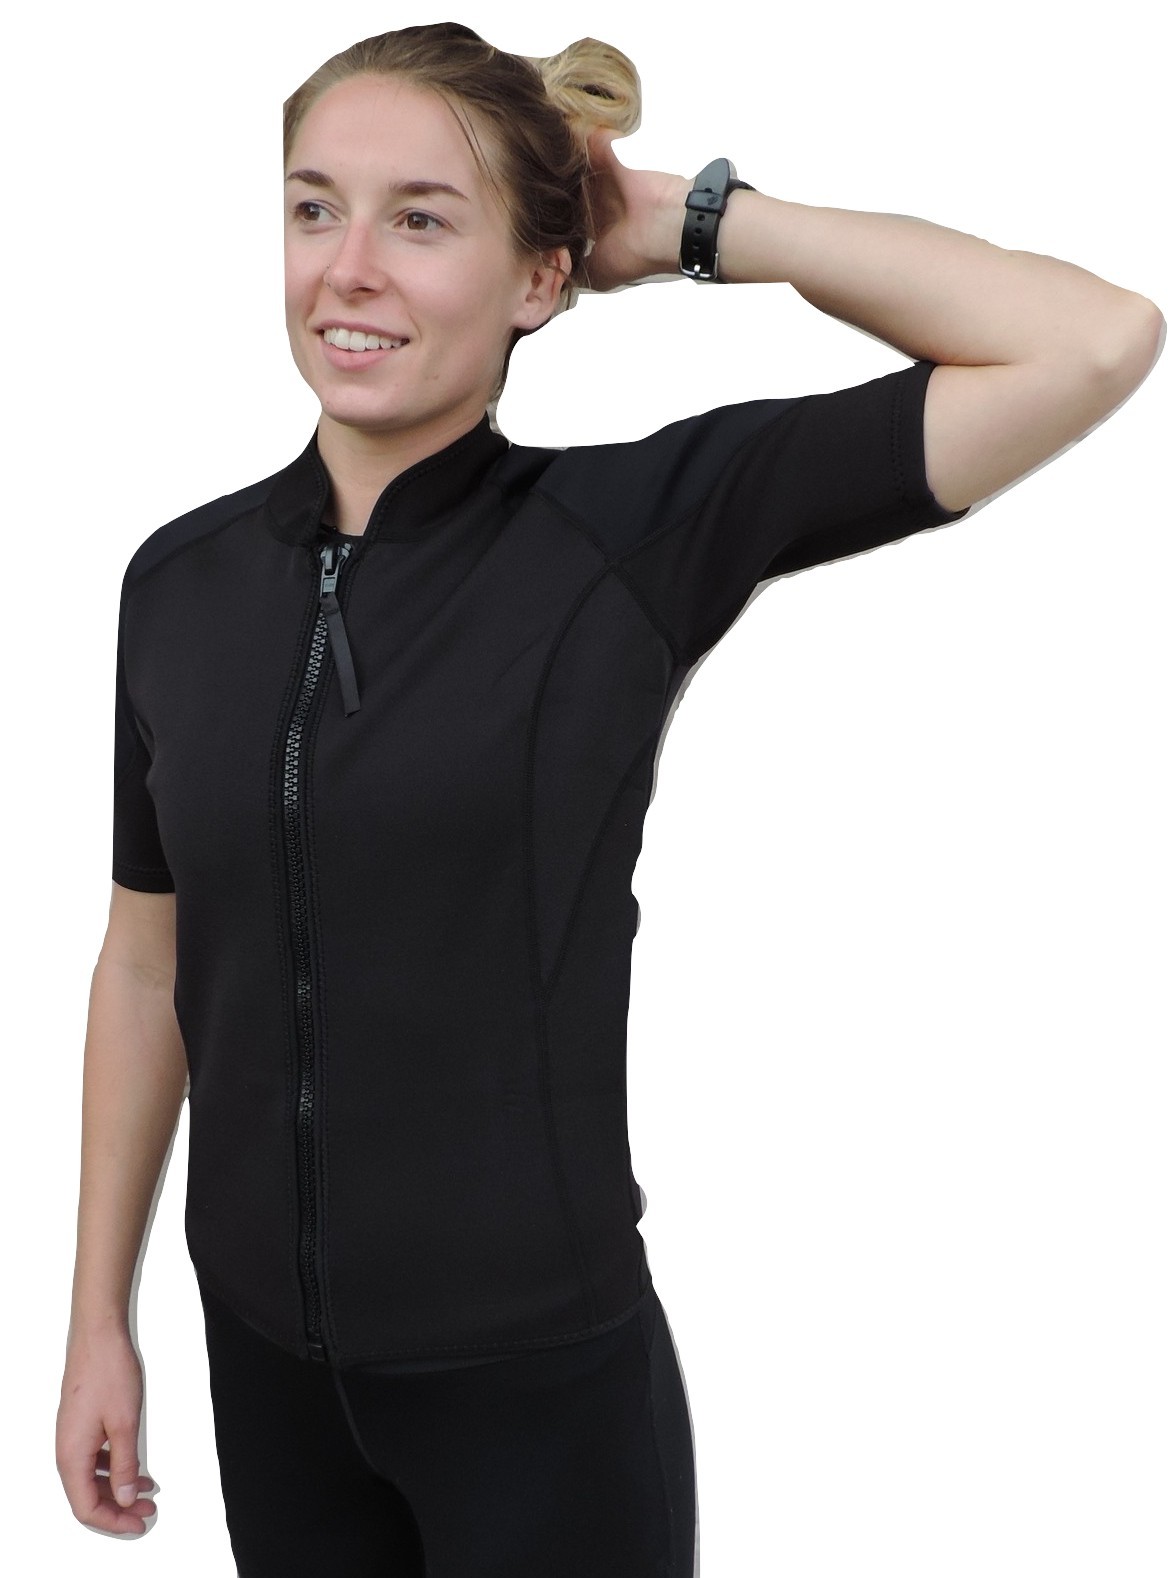 Women's 2mm Wetsuit Jacket with Short Sleeves, Front Zipper, Sizes: XS-2XL, Sale